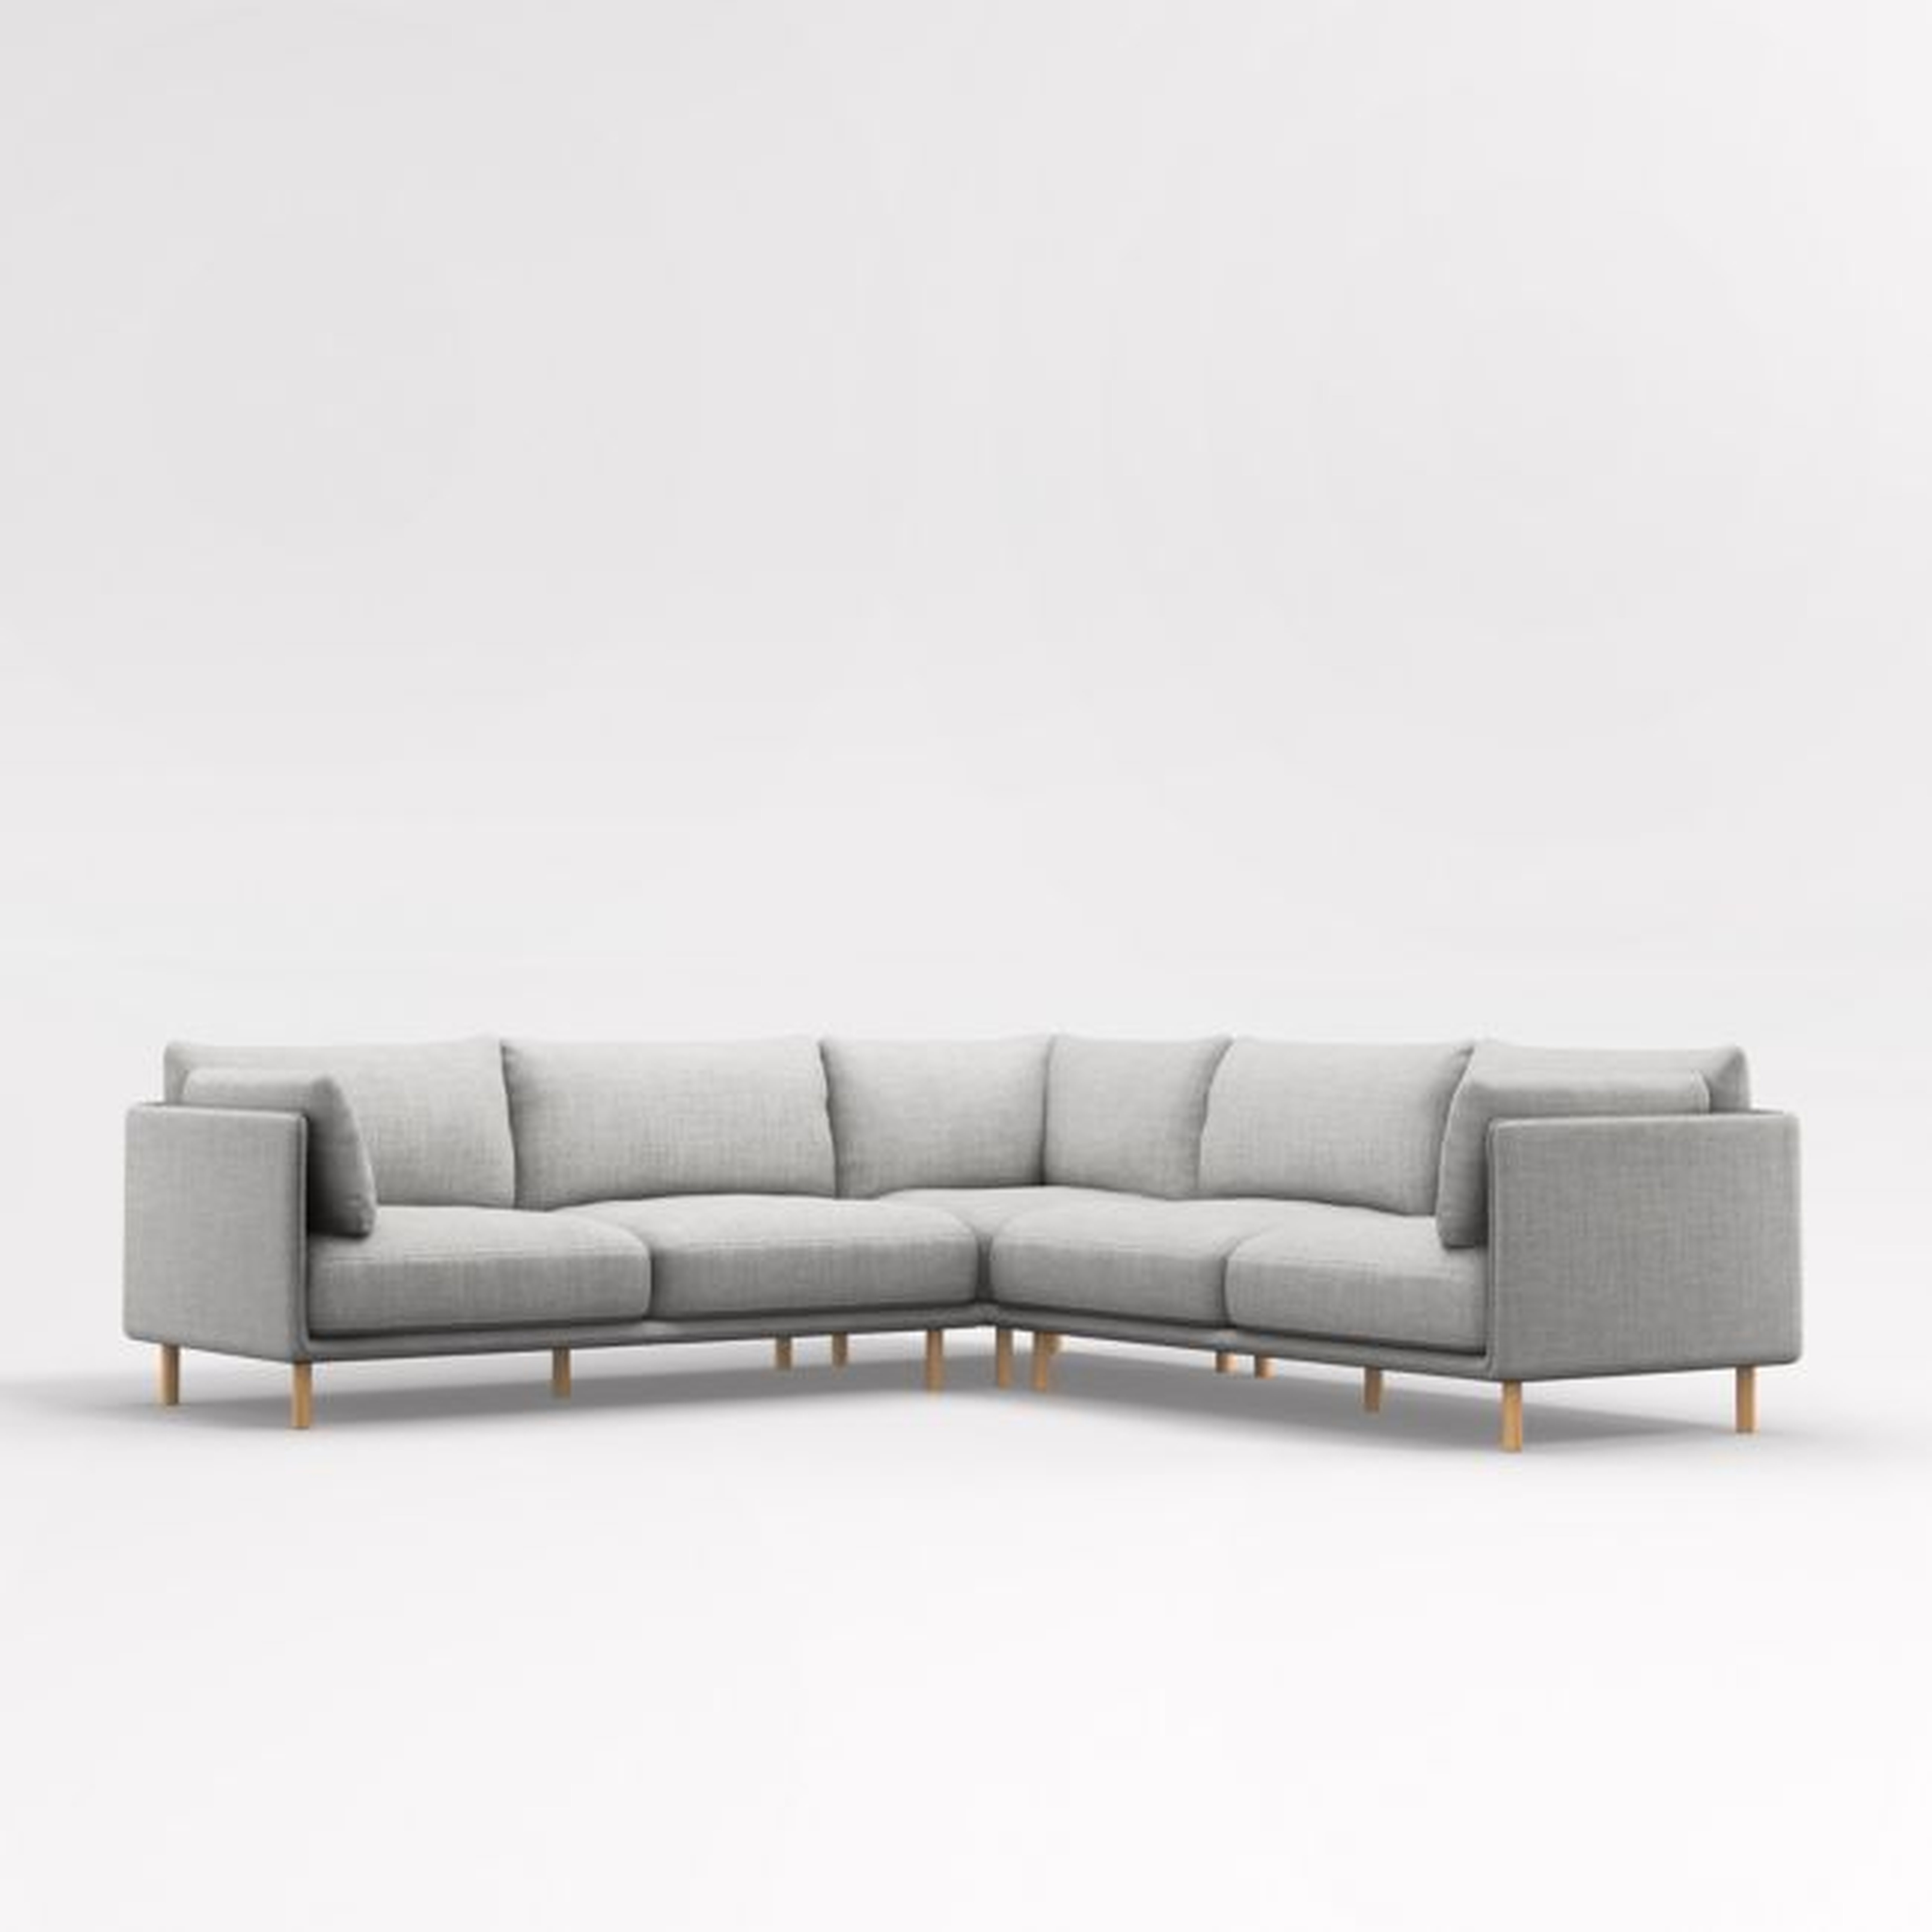 Wells 3-Piece L-Shaped Sectional Sofa with Natural Leg Finish - Crate and Barrel